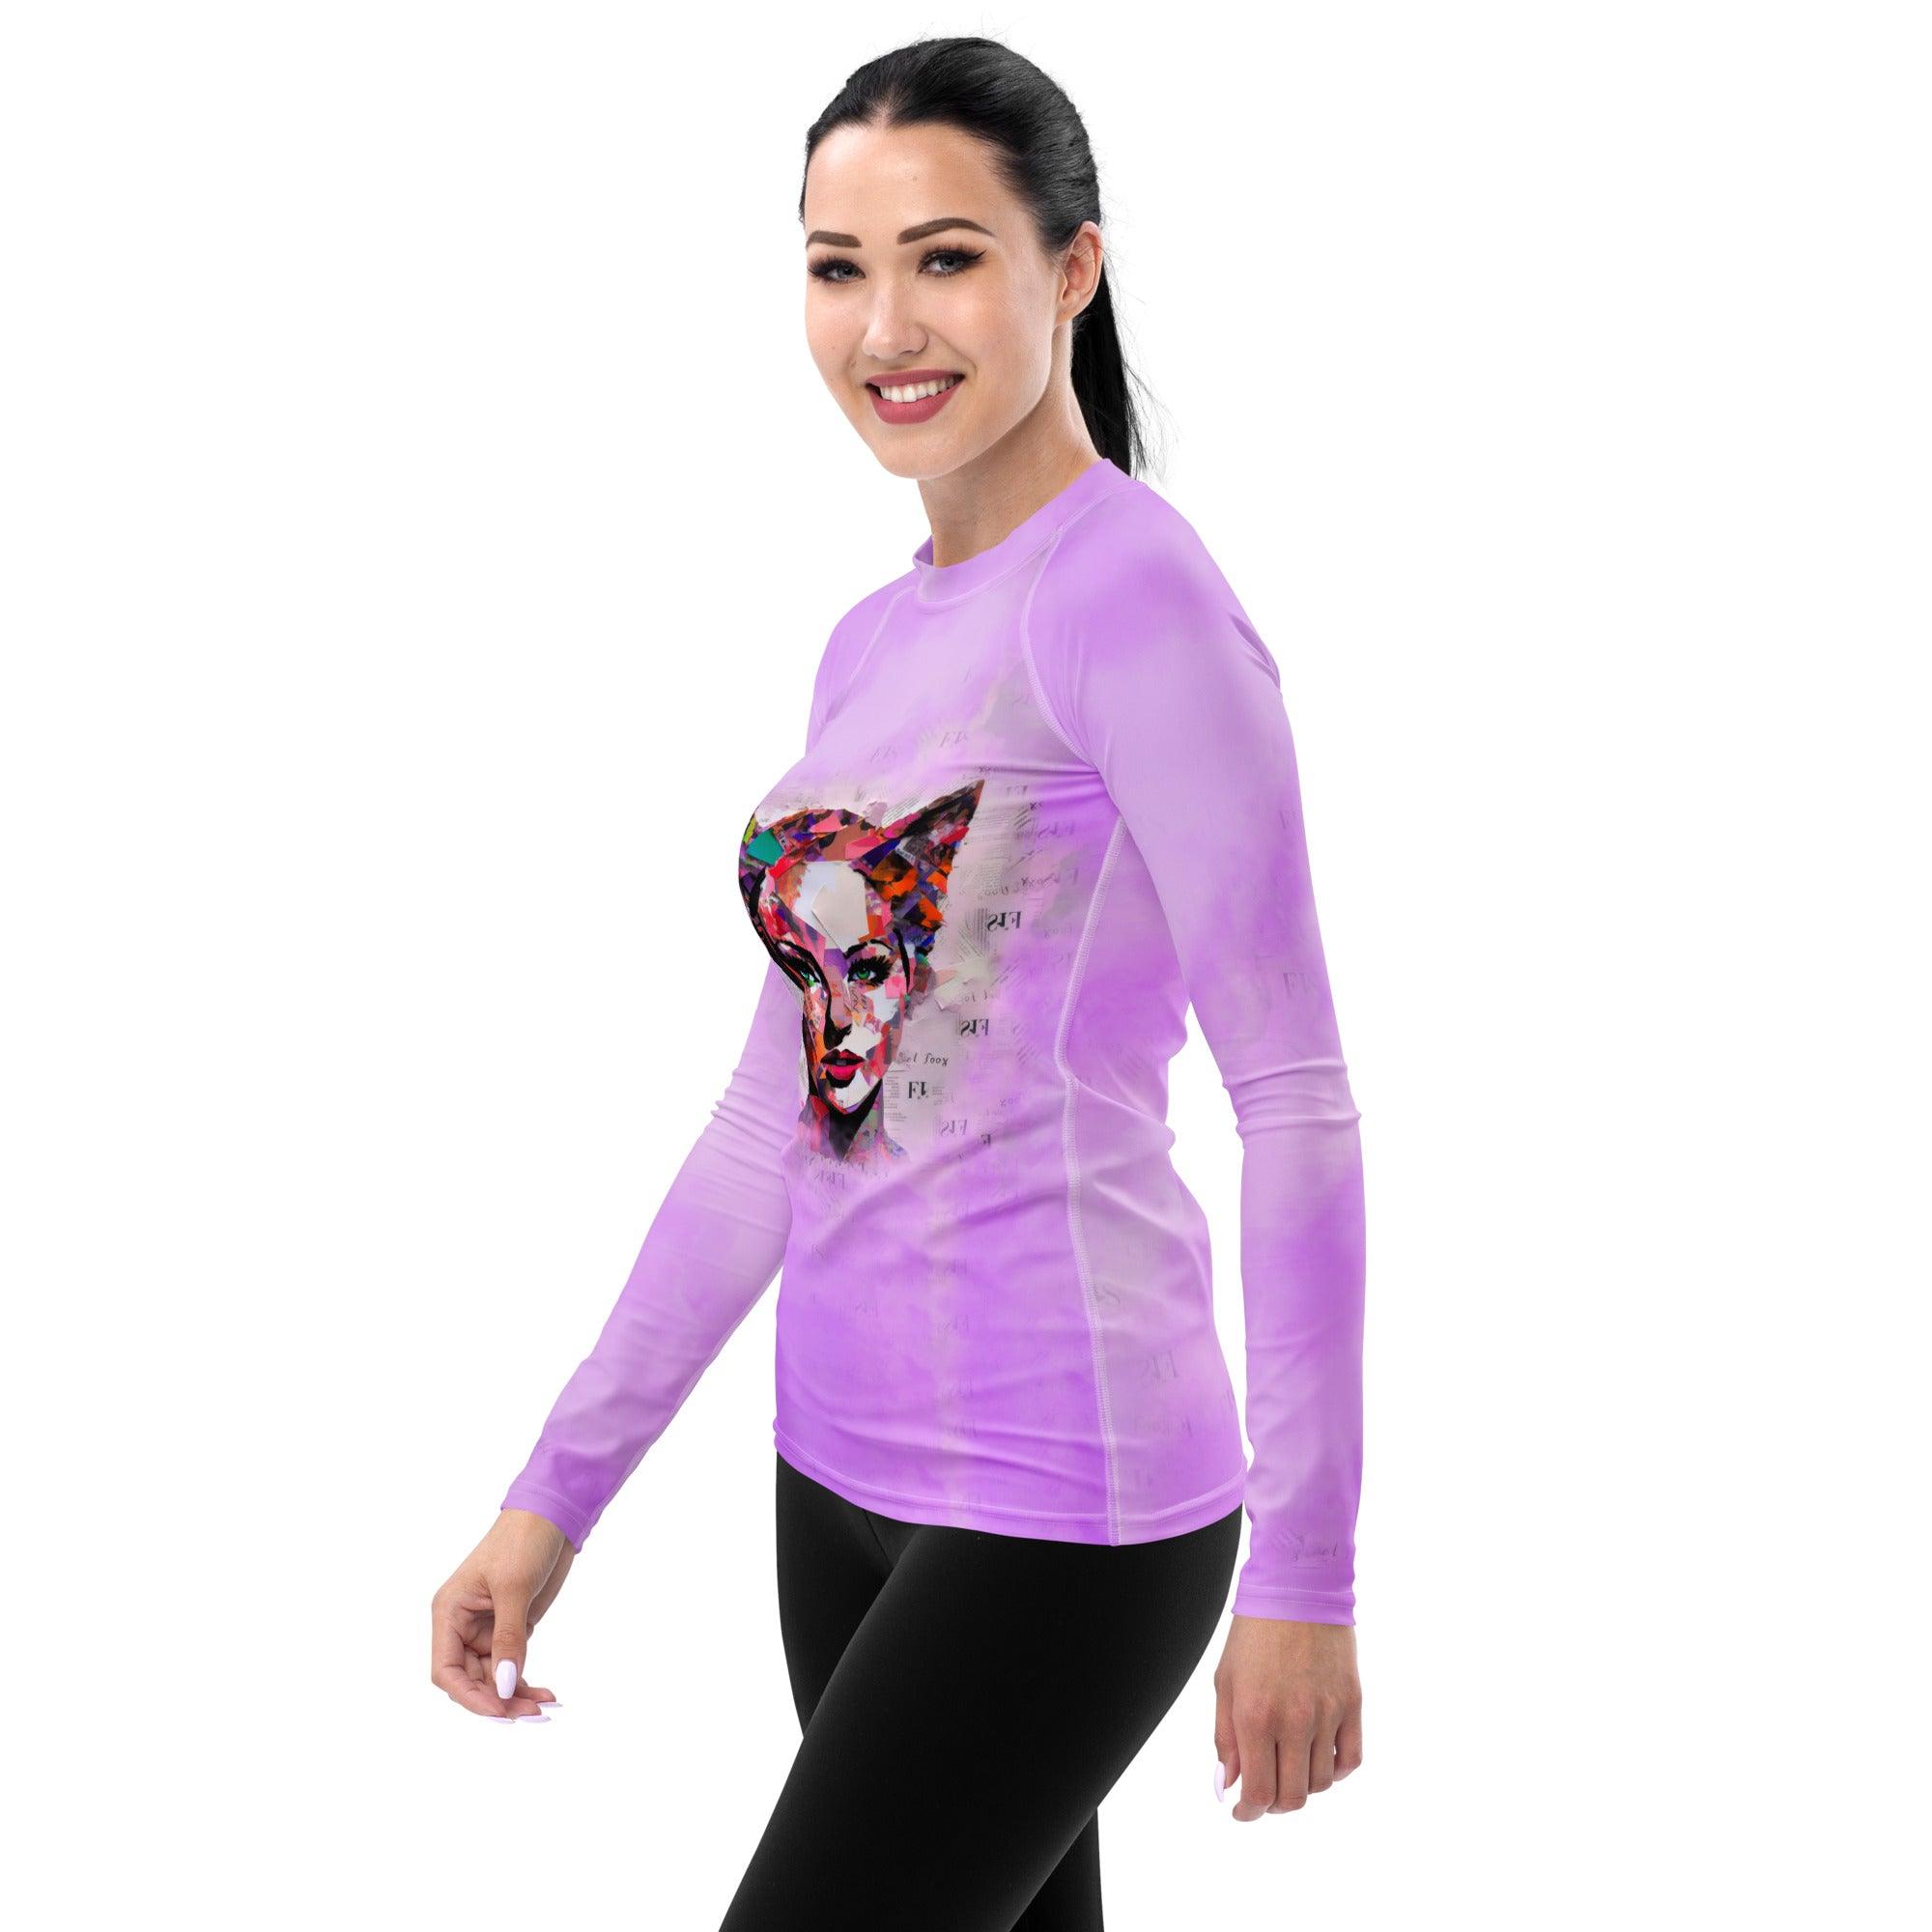 Melodic Reverie Women's All-Over Print Rash Guard - Beyond T-shirts